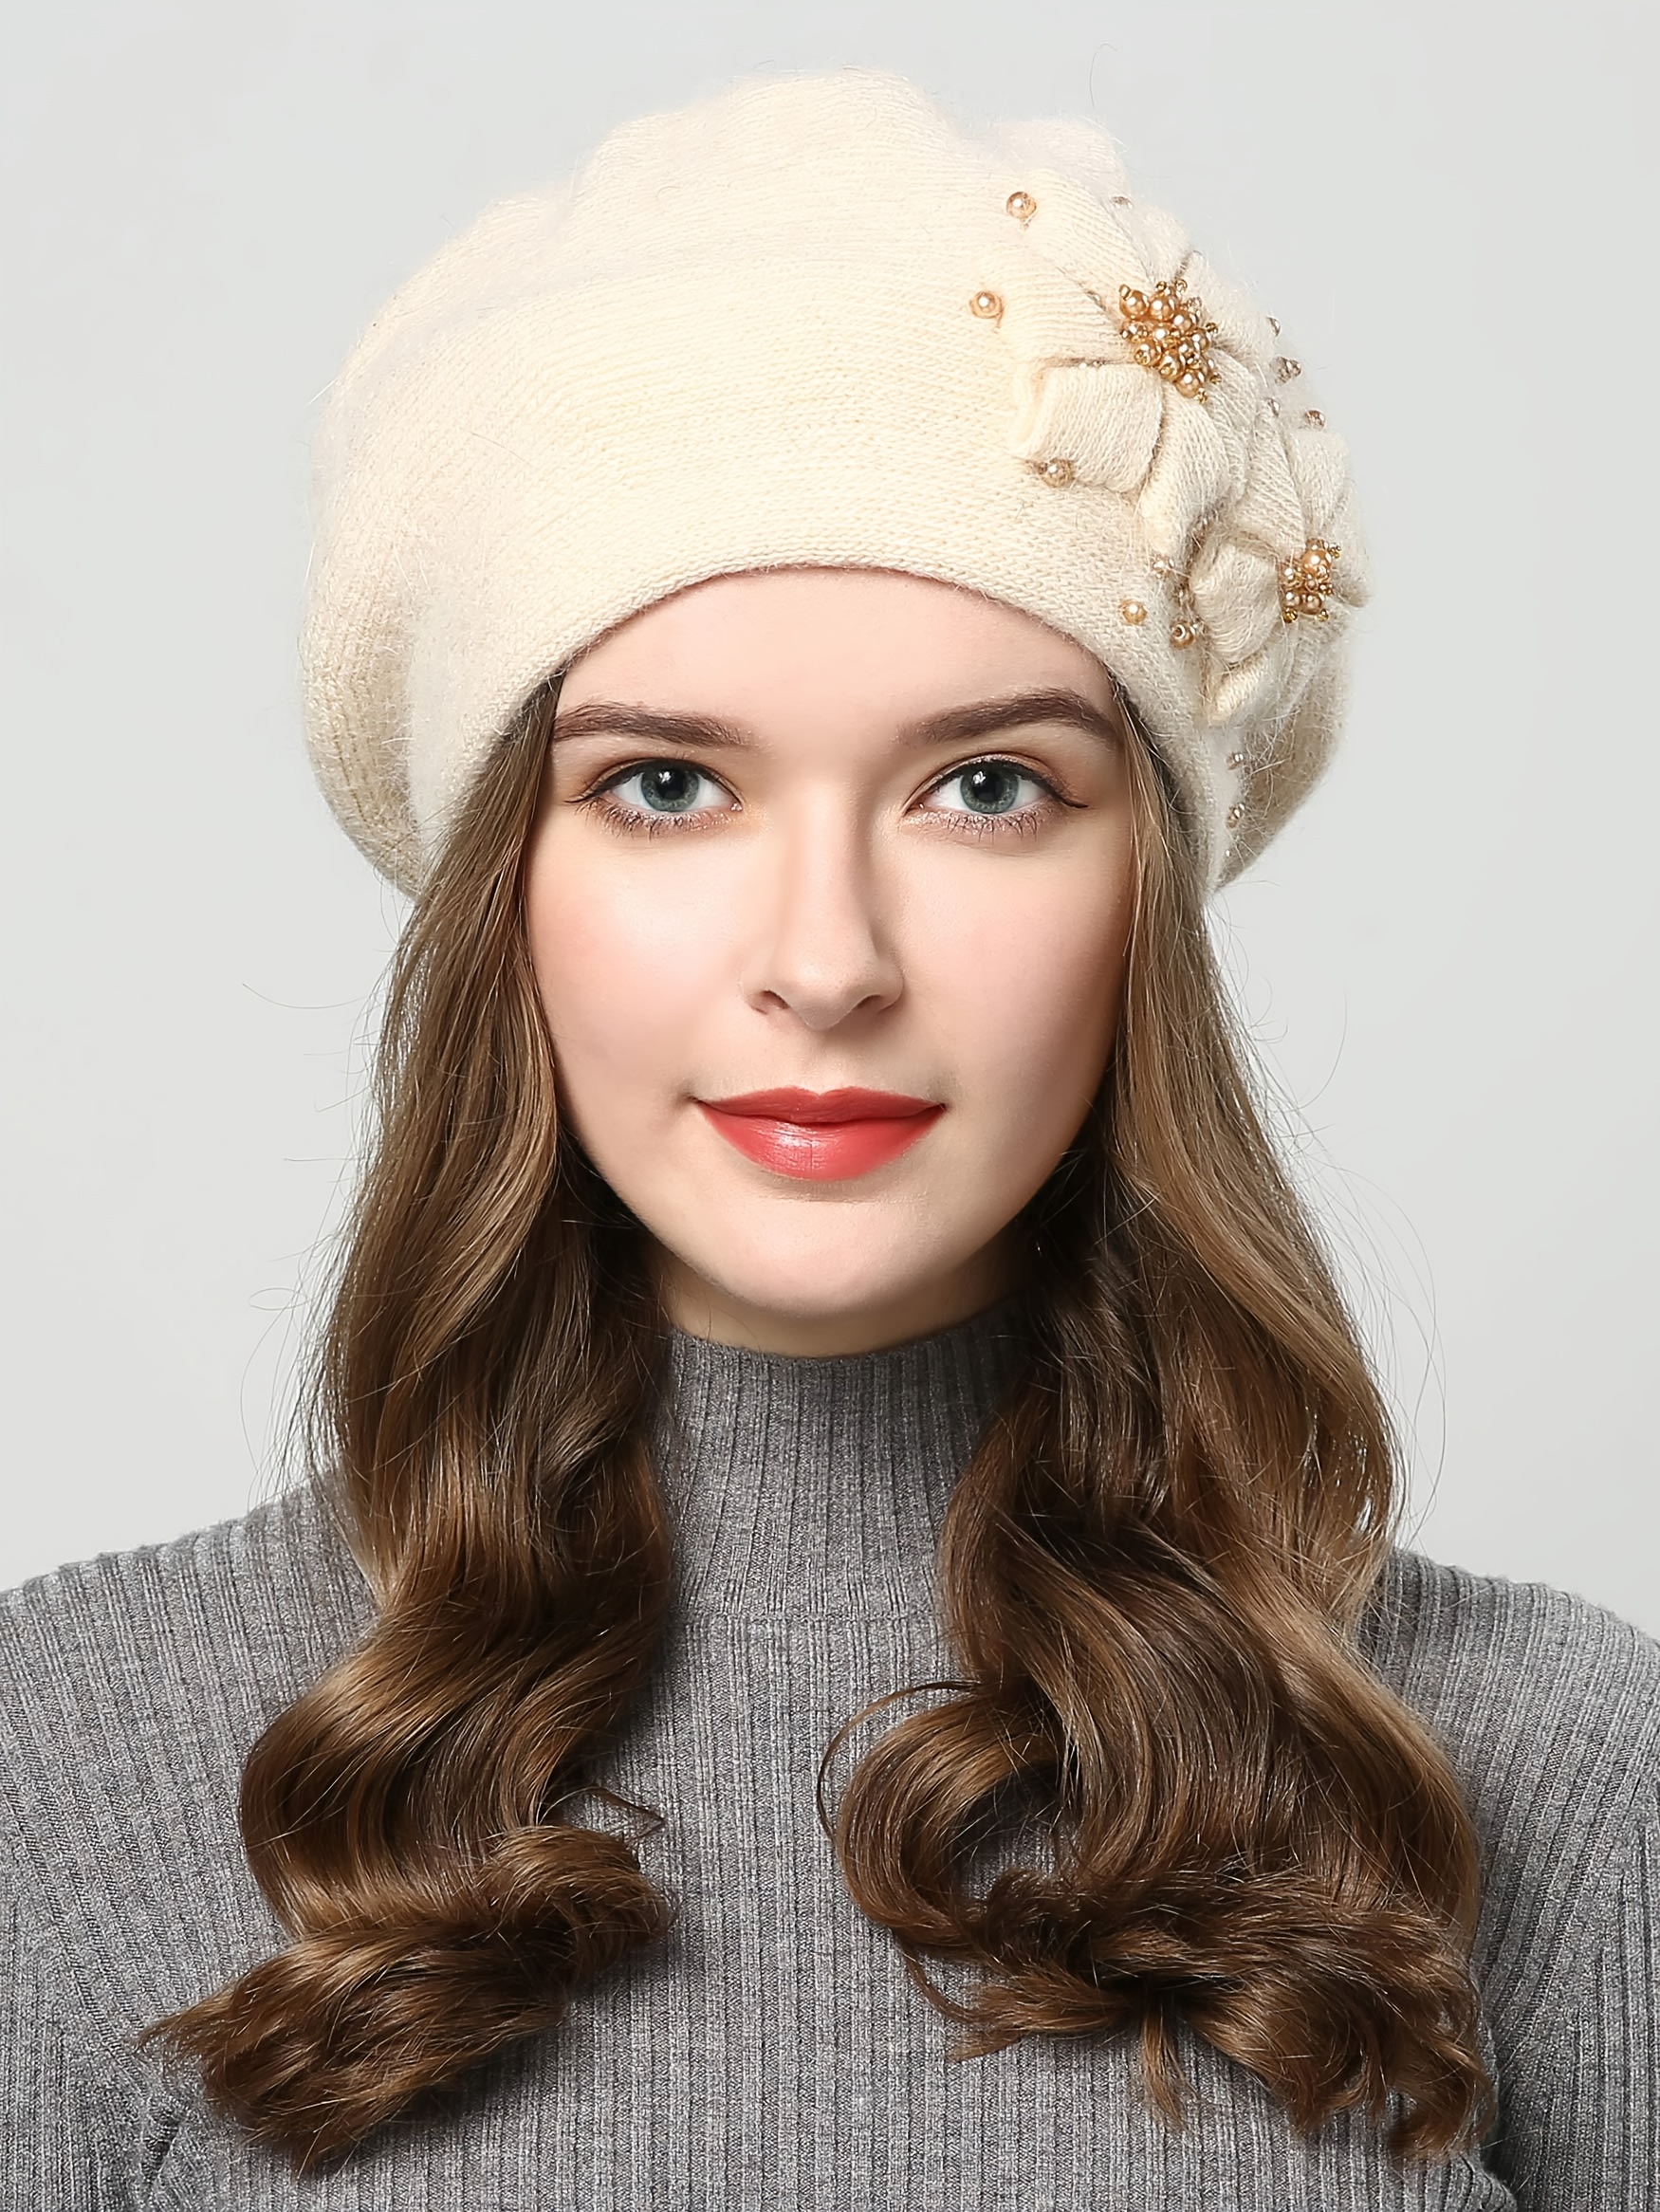 Spring Wool Women's Top Fur Ball pom poms Beret Hat For Laday